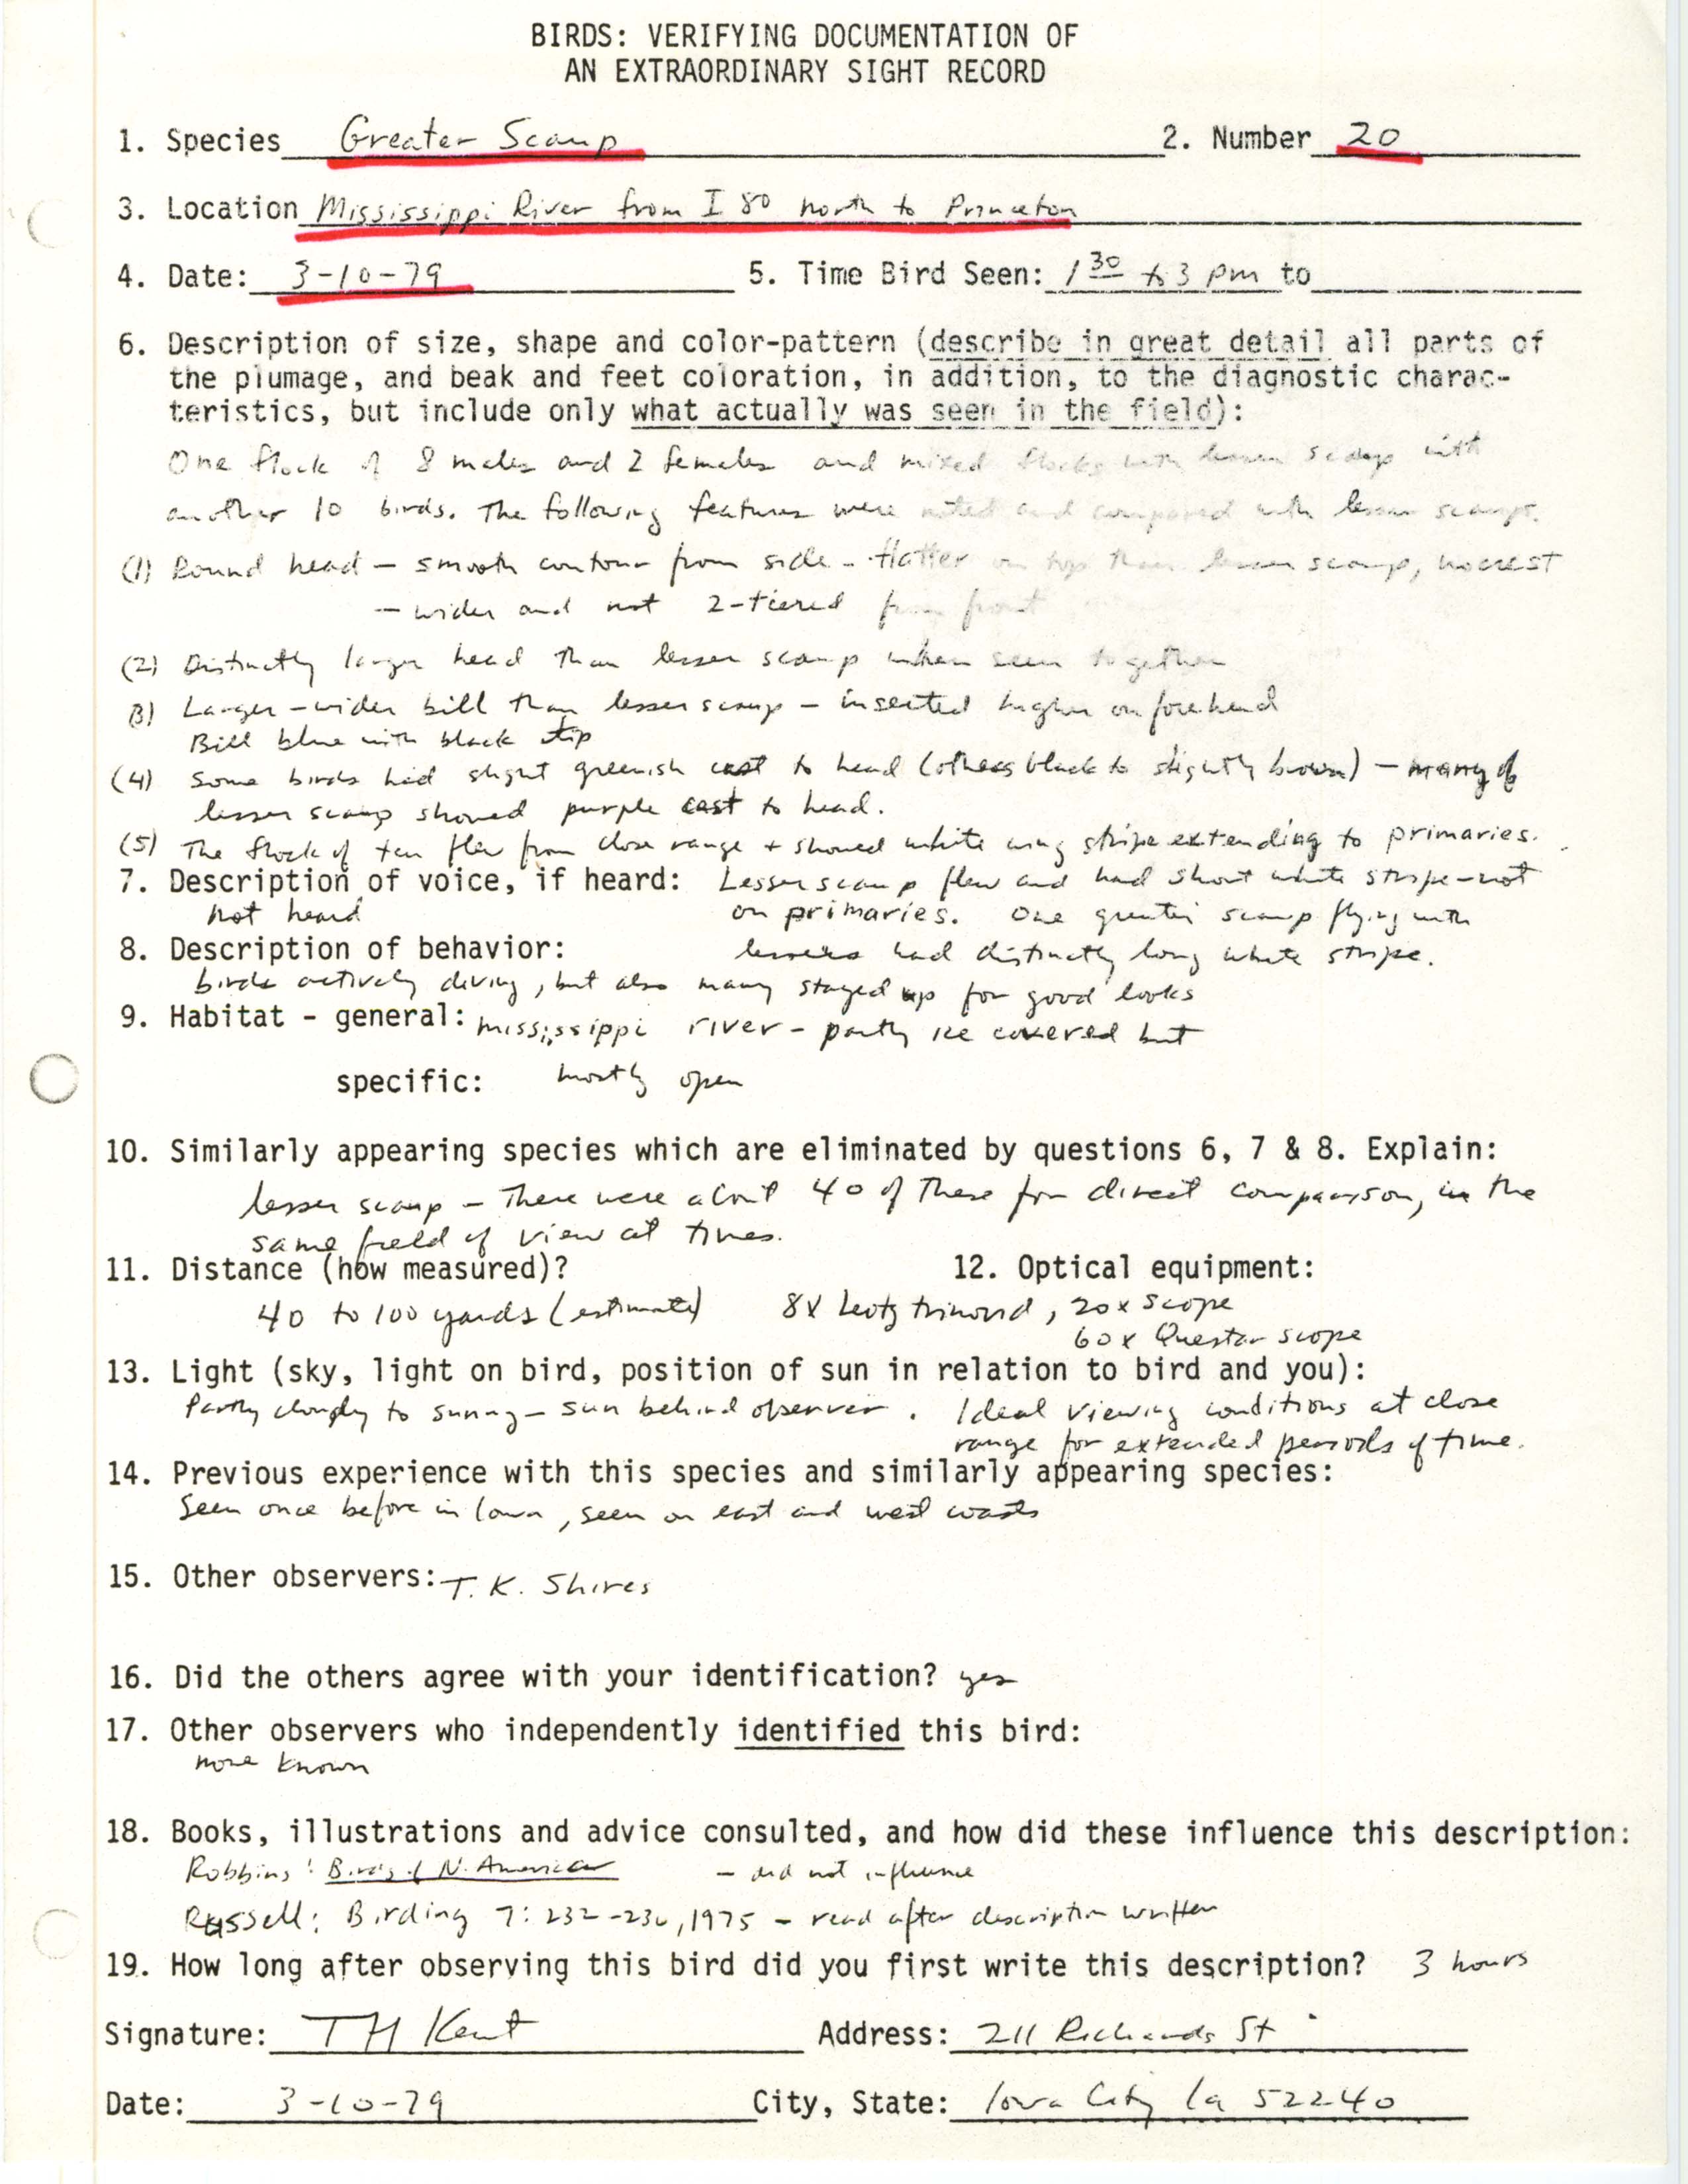 Rare bird documentation form for Greater Scaup at Princeton, 1979